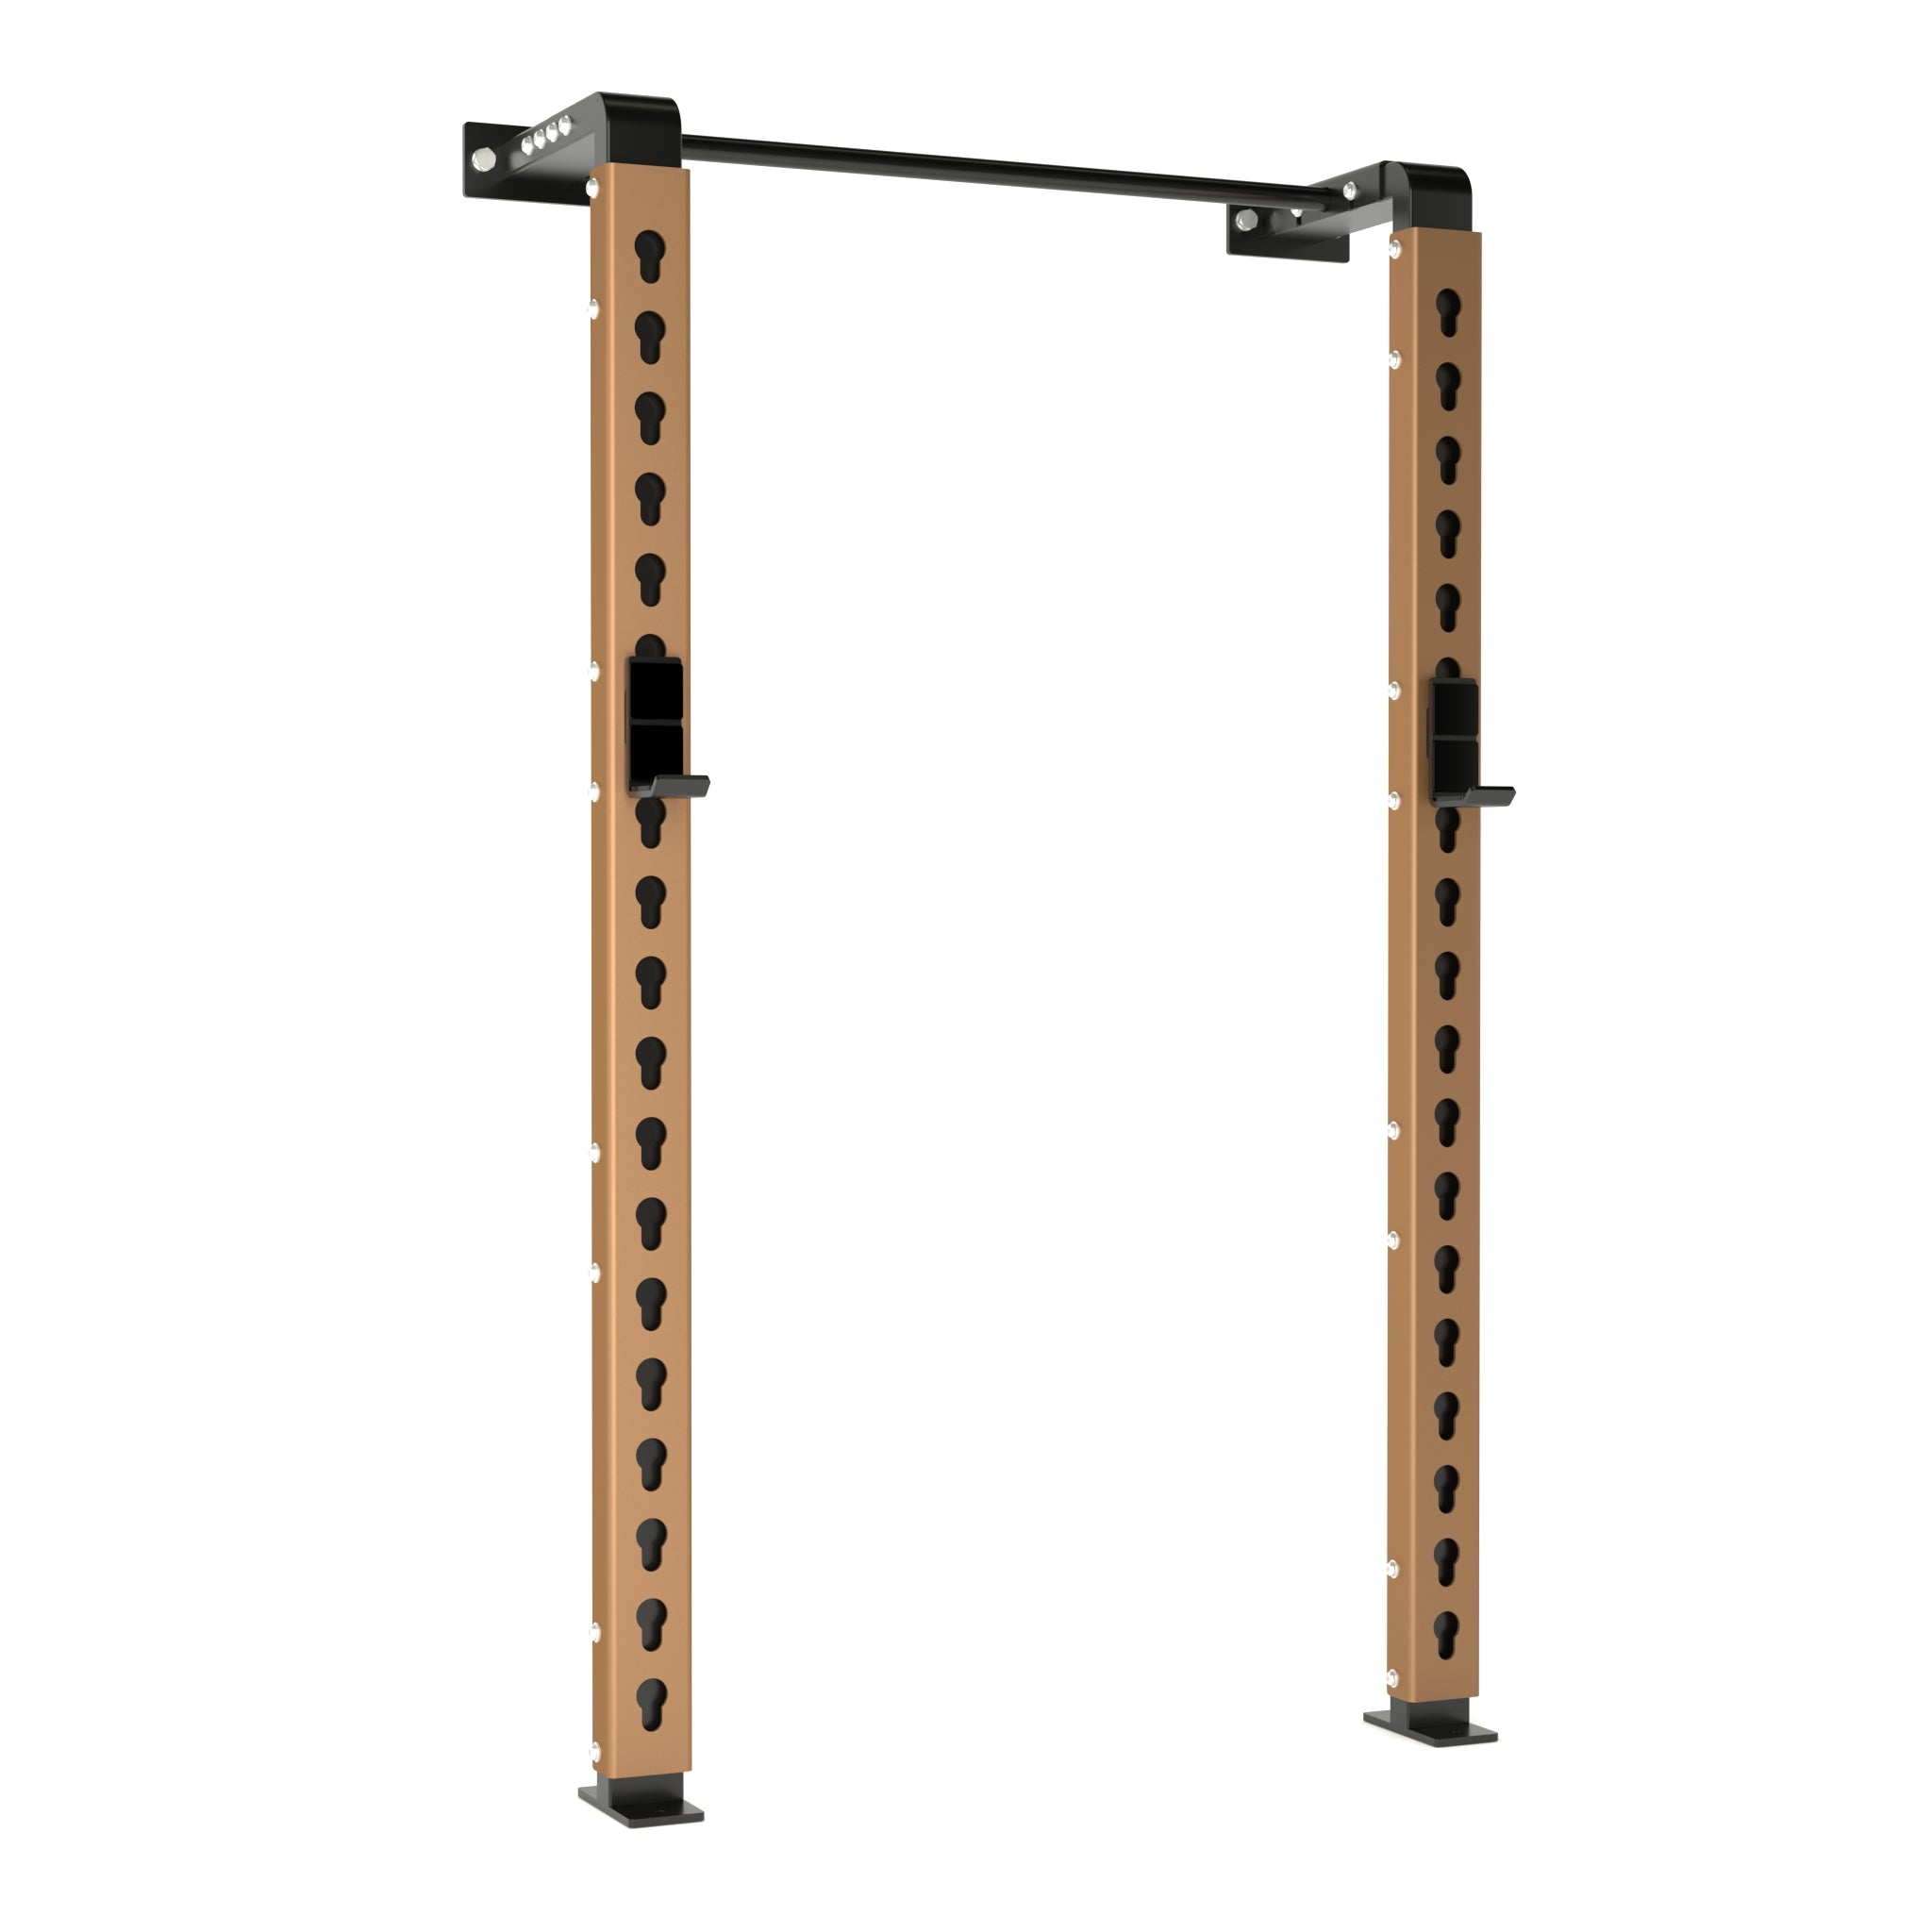 bronze wall mounted rack with single-bar pull-up